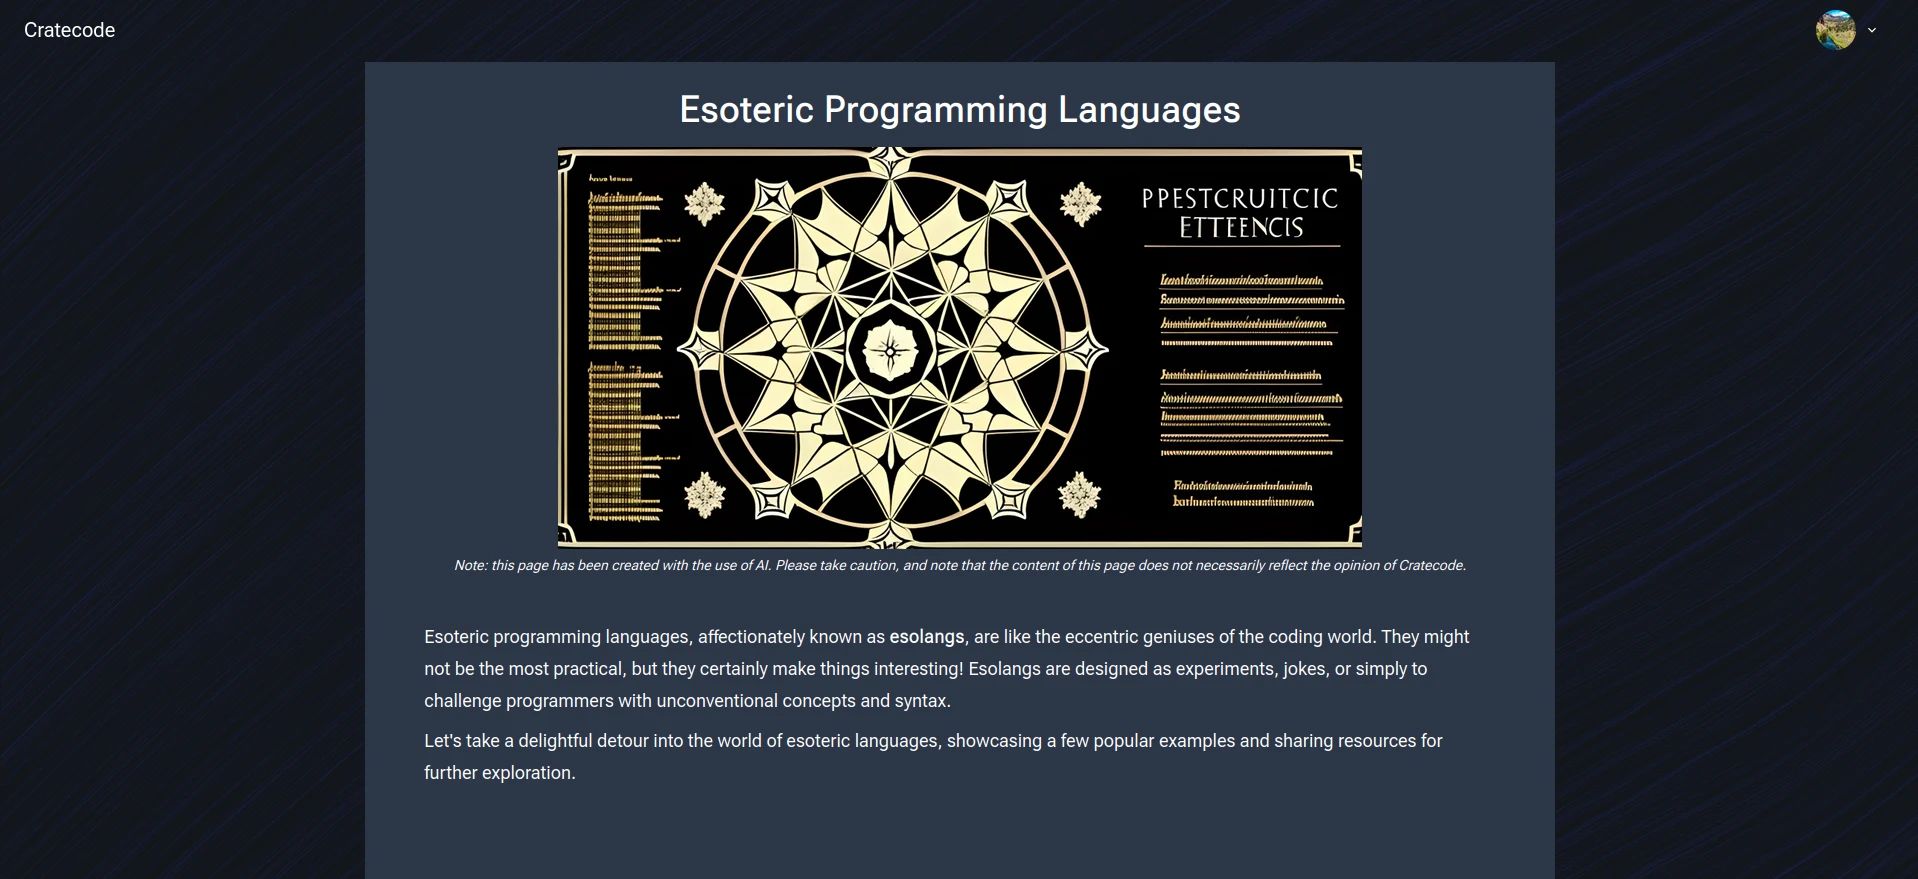 A screenshot of an AI-generated article on Cratecode about esoteric programming languages